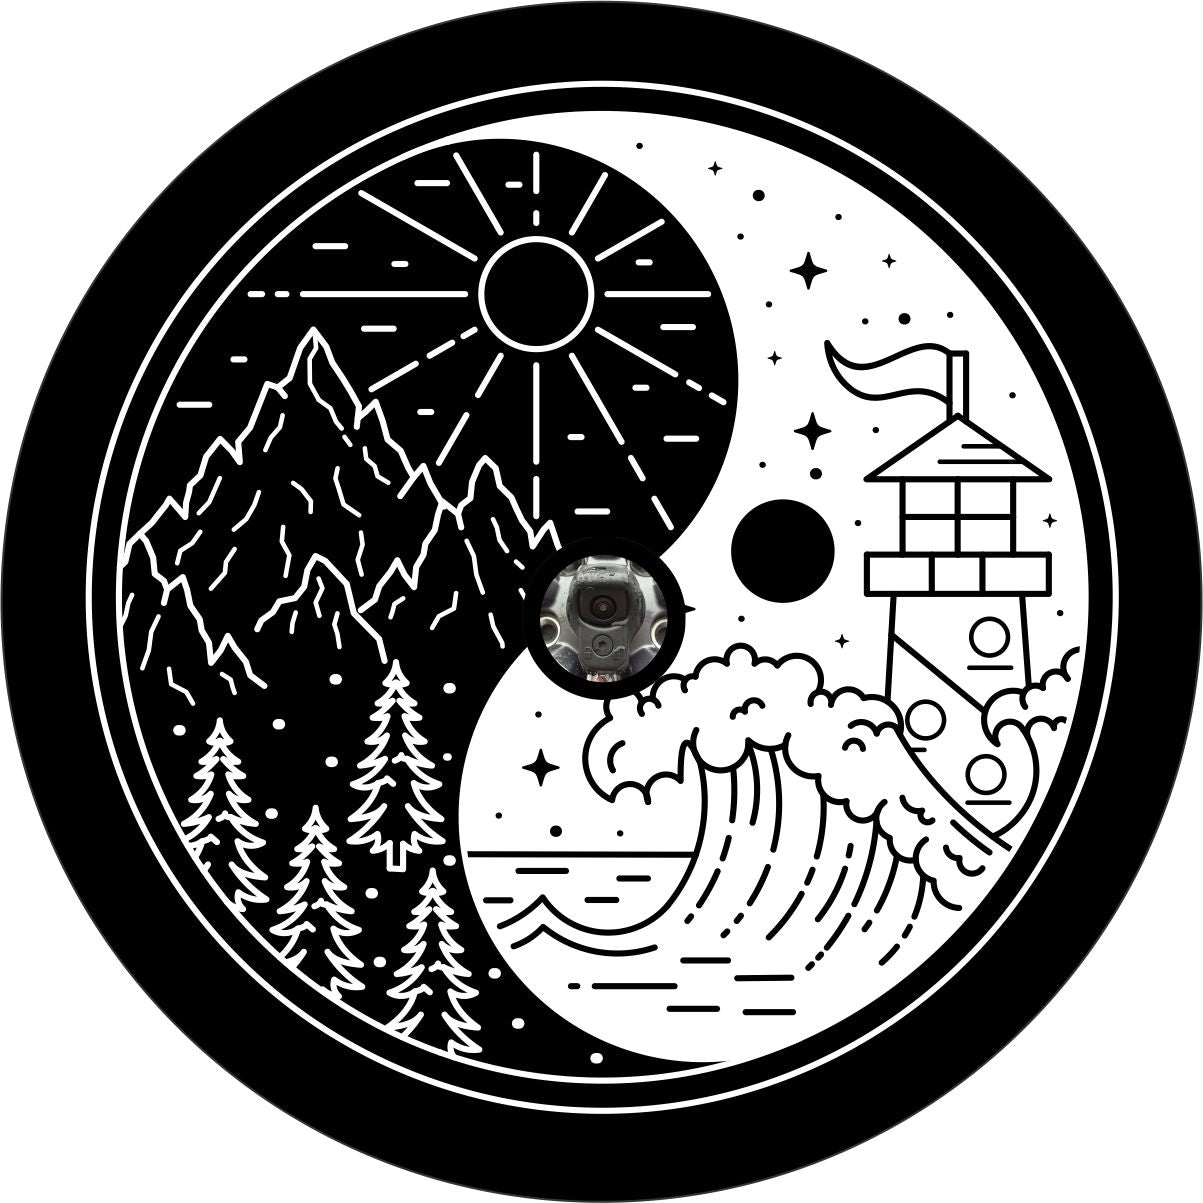 Yin yang spare tire cover design with mountains on one side and the beach and lighthouse on the other side of the yin yang symbol with a camera hole for a backup camera